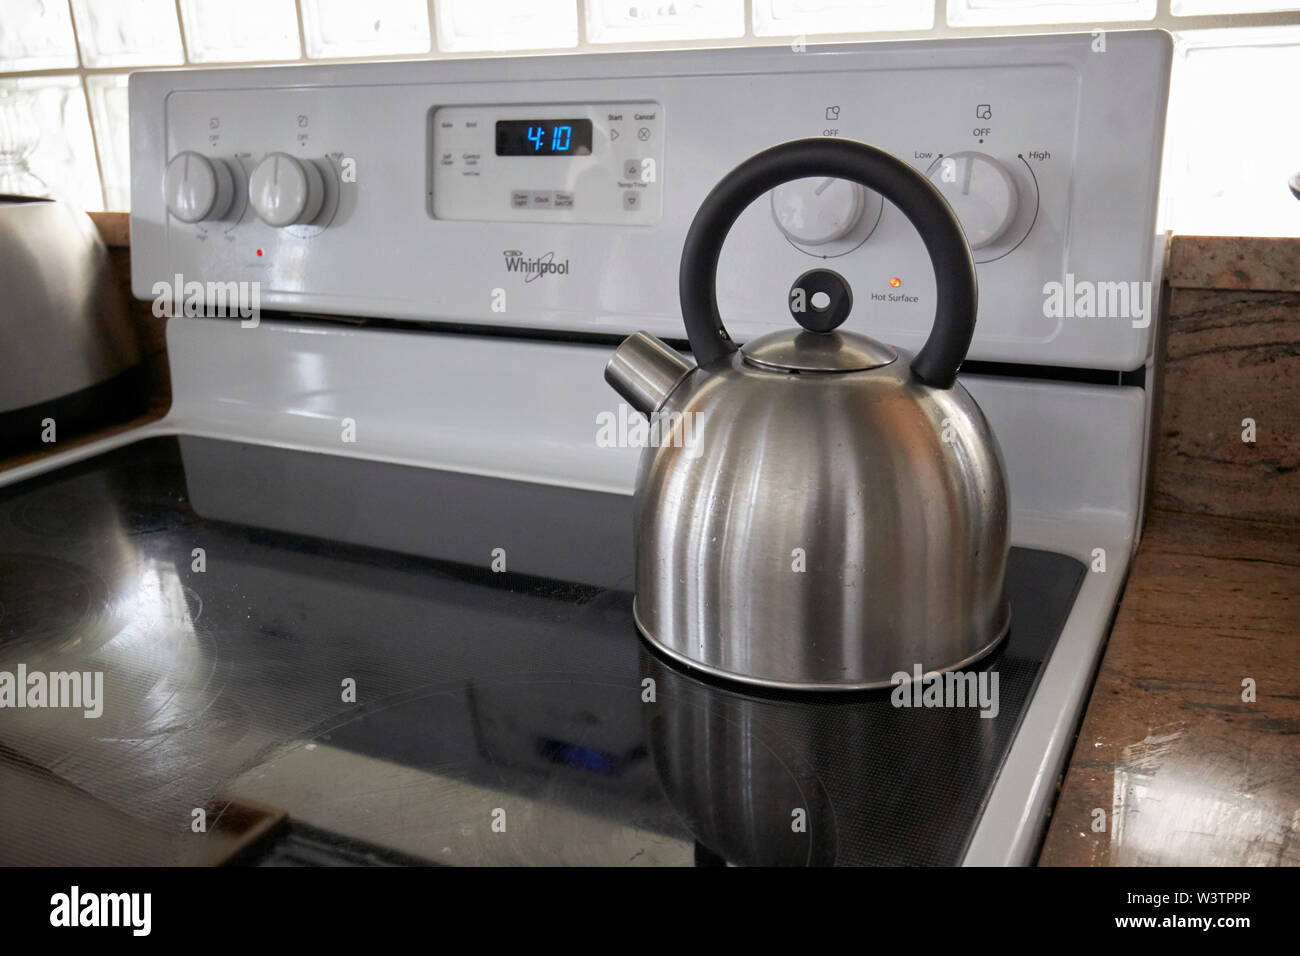 https://c8.alamy.com/comp/W3TPPP/metal-kettle-on-a-whirlpool-electric-stove-top-boiling-water-in-a-kitchen-in-the-usa-united-states-of-america-W3TPPP.jpg